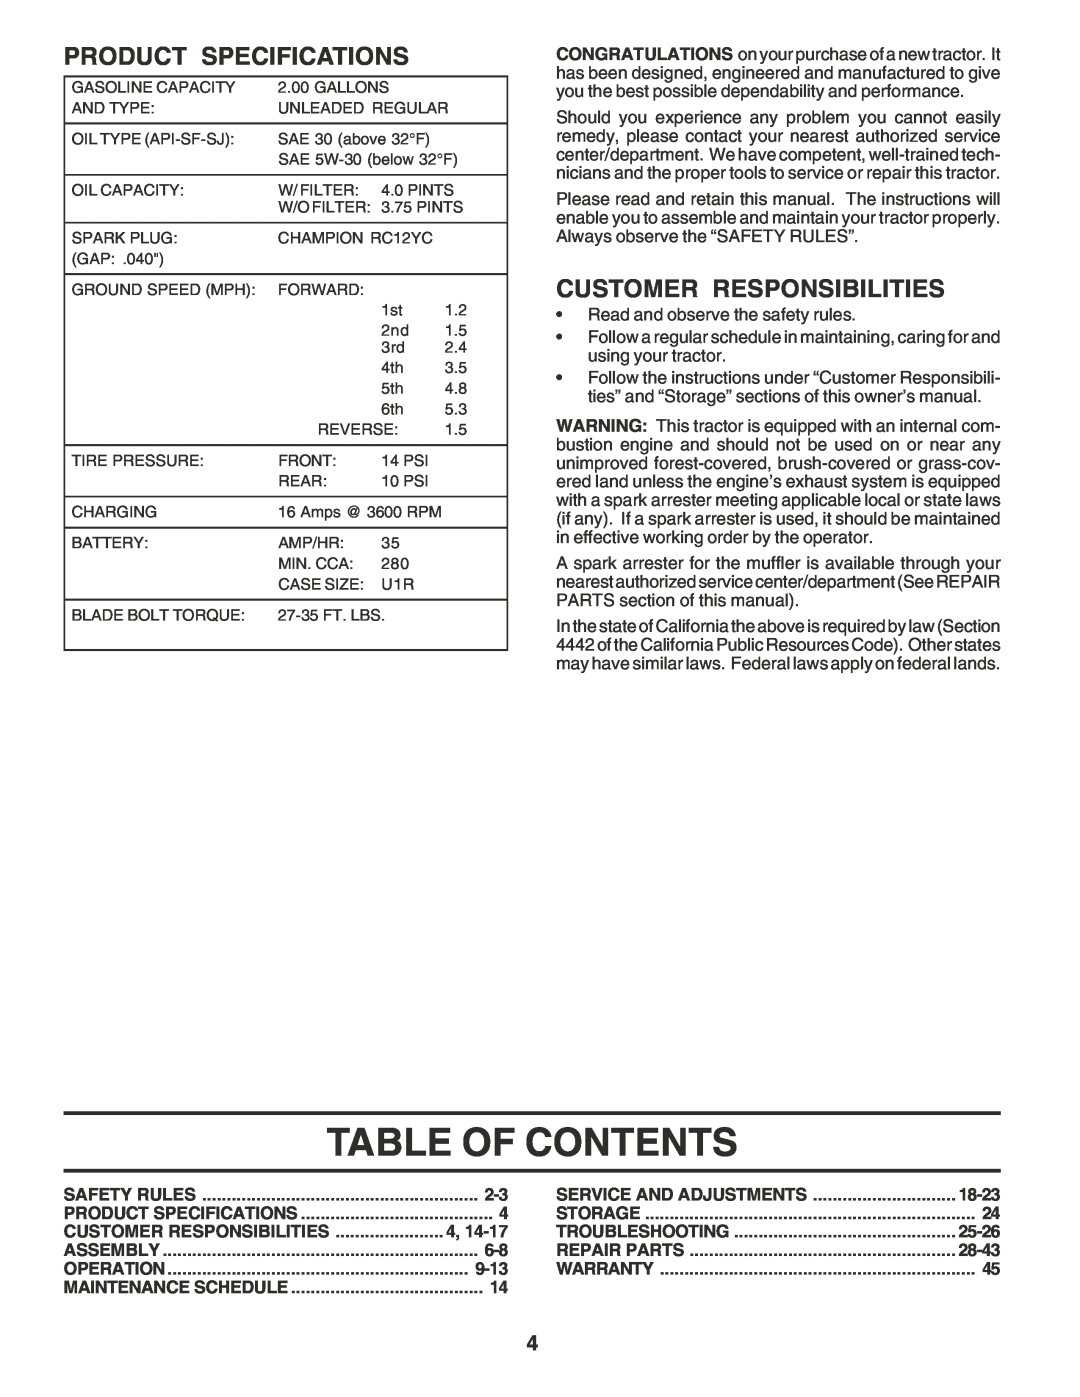 Poulan PR17542STC Table Of Contents, Product Specifications, Customer Responsibilities, 9-13, 18-23, 25-26, 28-43 